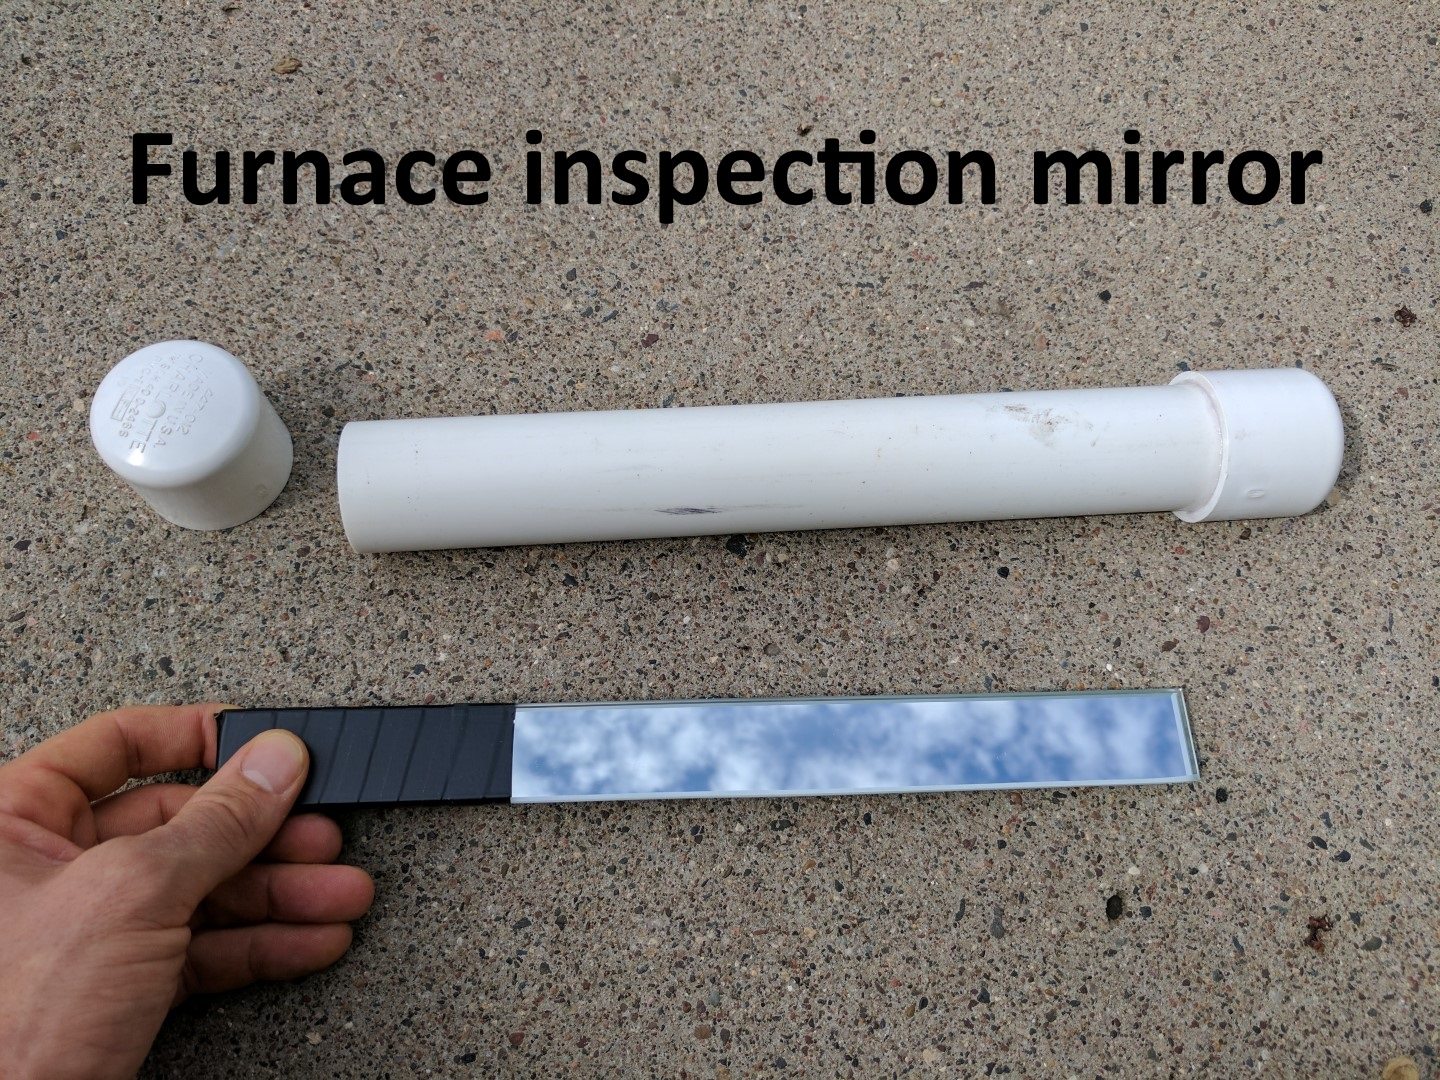 Inspector Gadgets: 8 Tools in Every Home Inspector Tool Kit